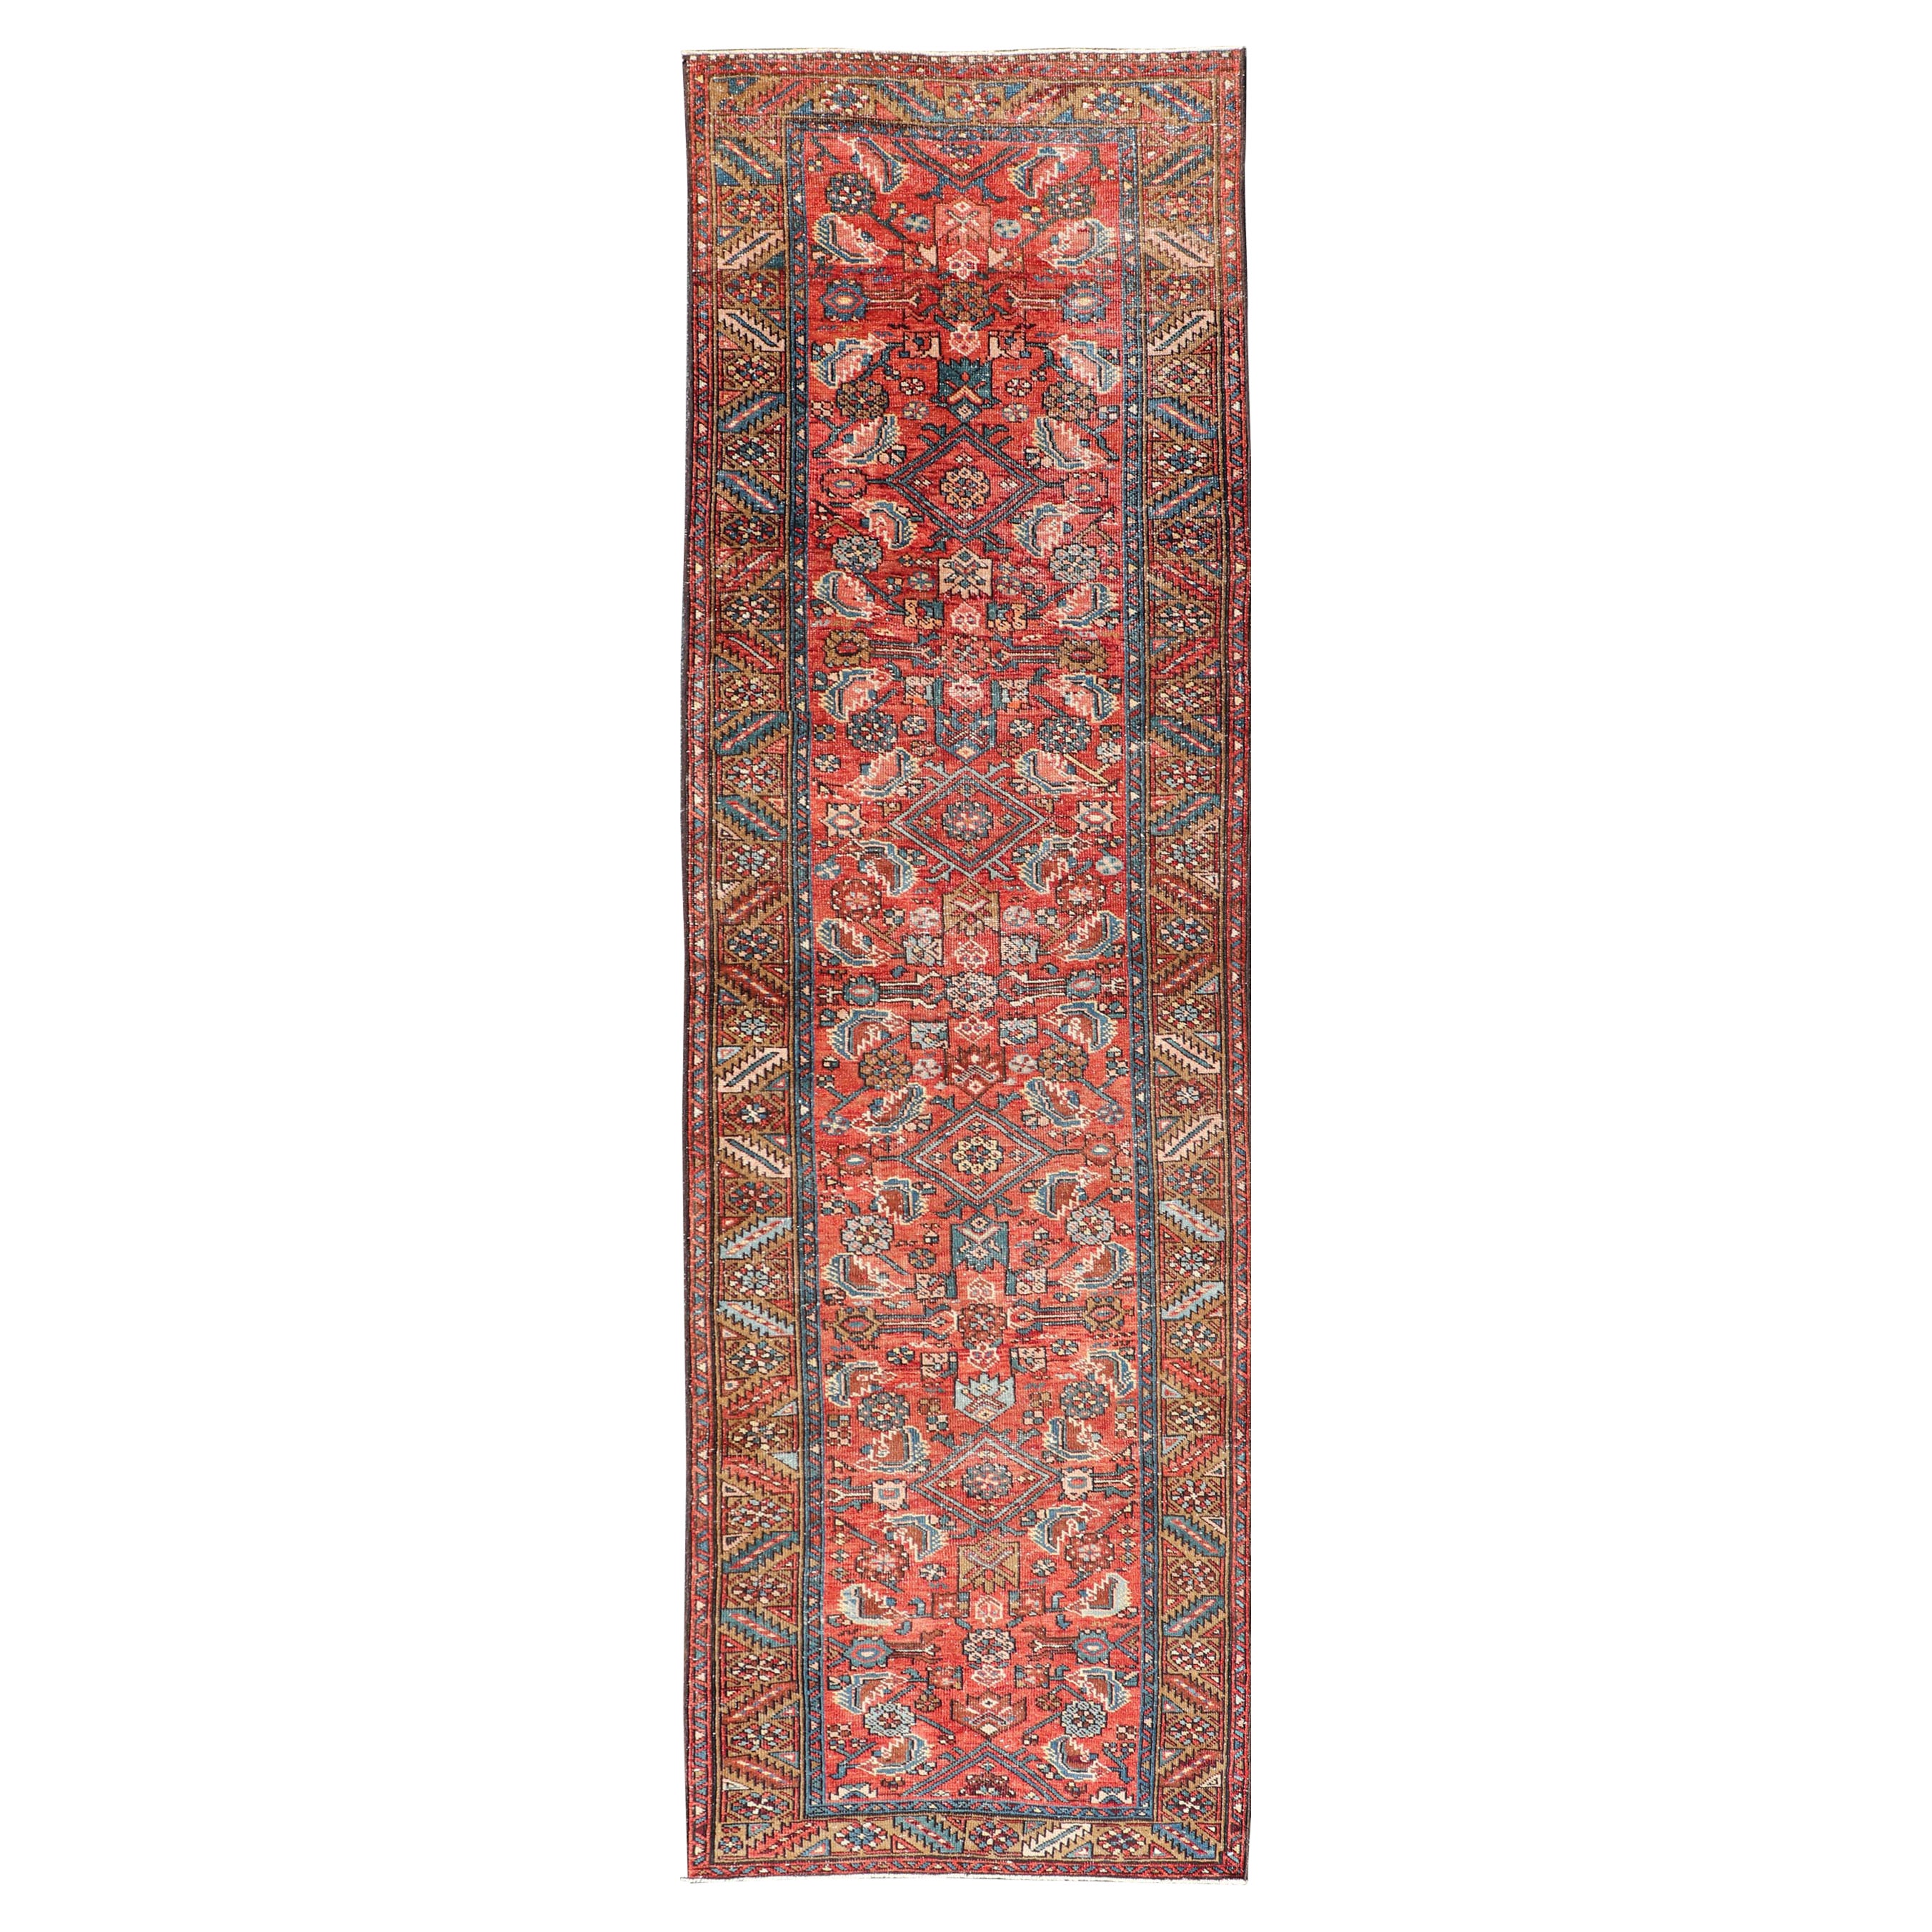 Antique Persian Heriz Runner with Colorful All-Over Stylized Floral Design For Sale